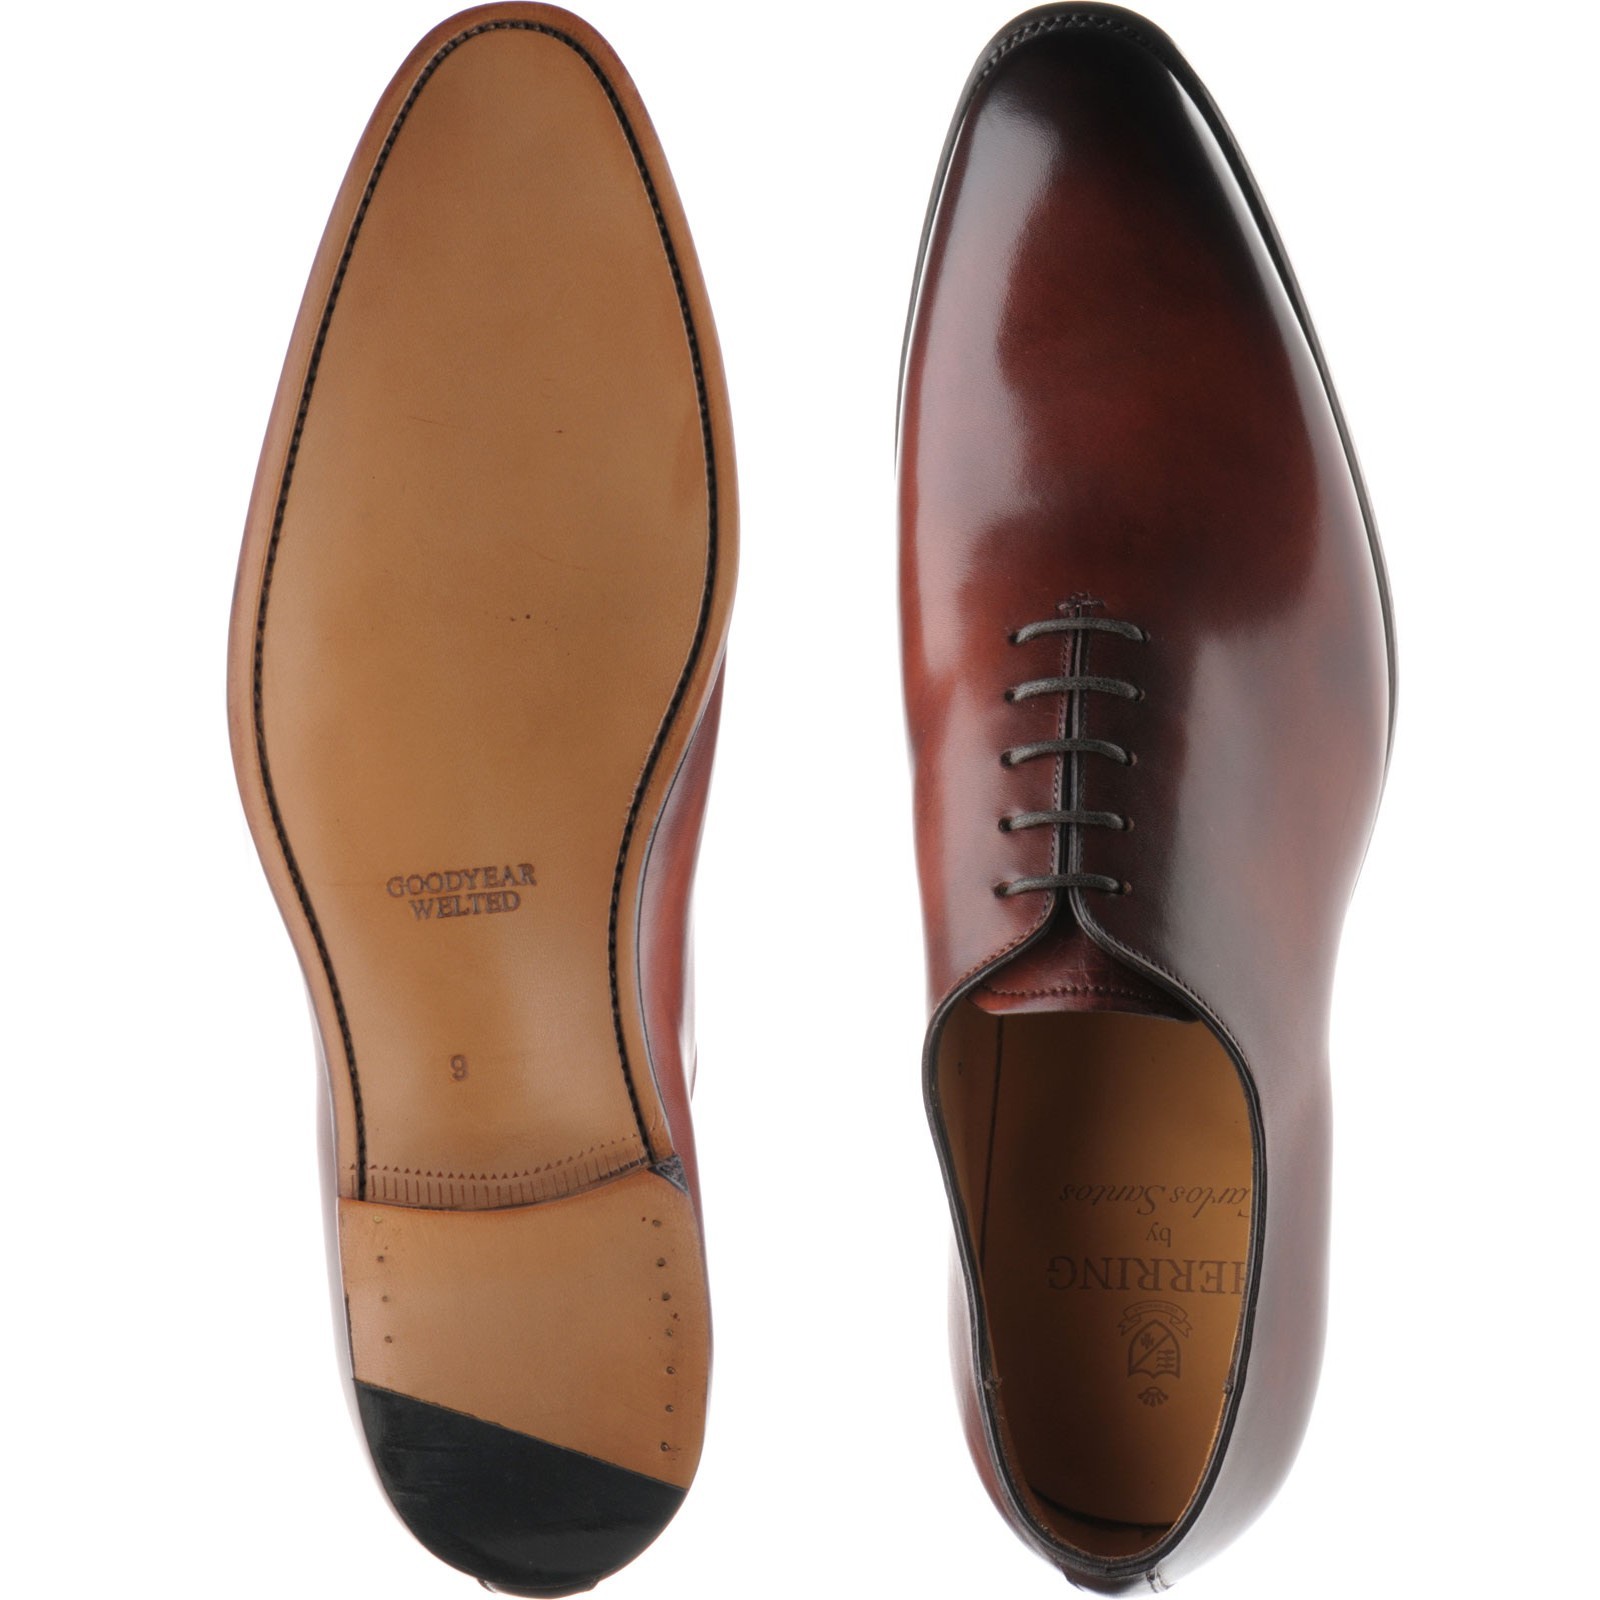 Herring shoes | Herring Classic | Chaucer wholecuts in Rosewood Calf at ...